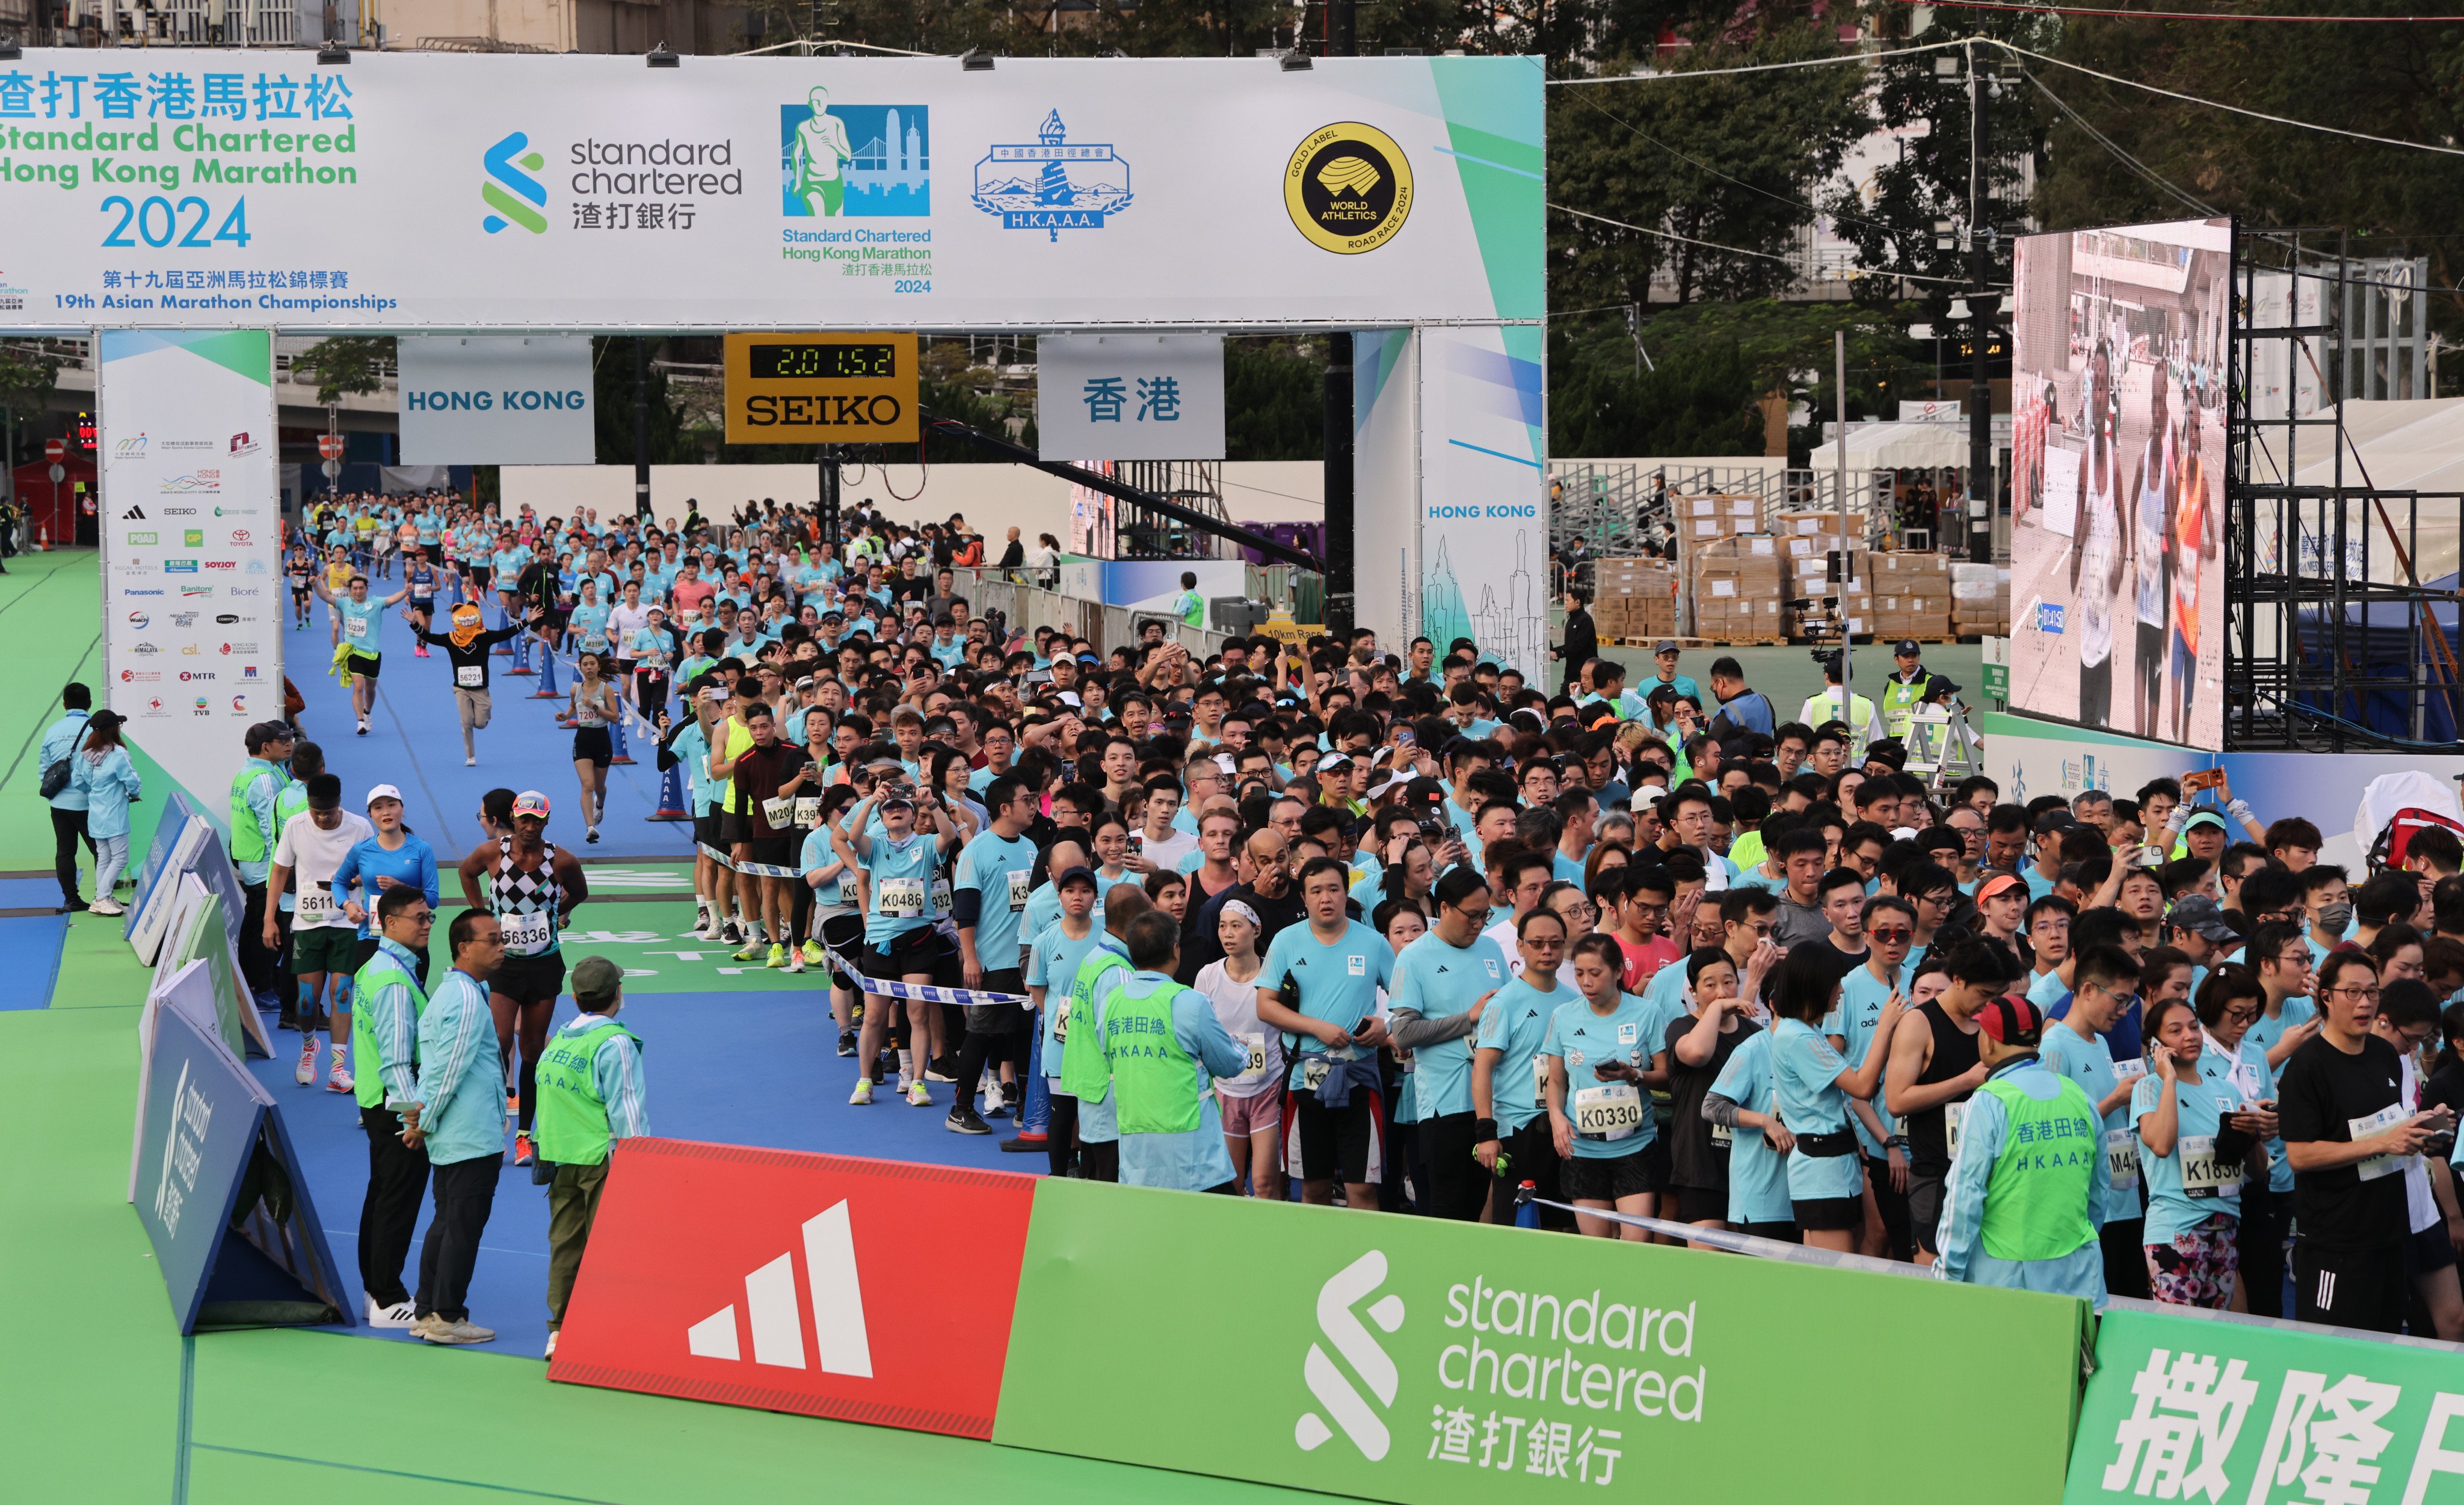 Runners arrive at the finish line at Victoria Park, Causeway Bay, on Sunday. The man’s death marked the sixth fatality in the history of the Standard Chartered Hong Kong Marathon, which began in 1997.Photo: May Tse